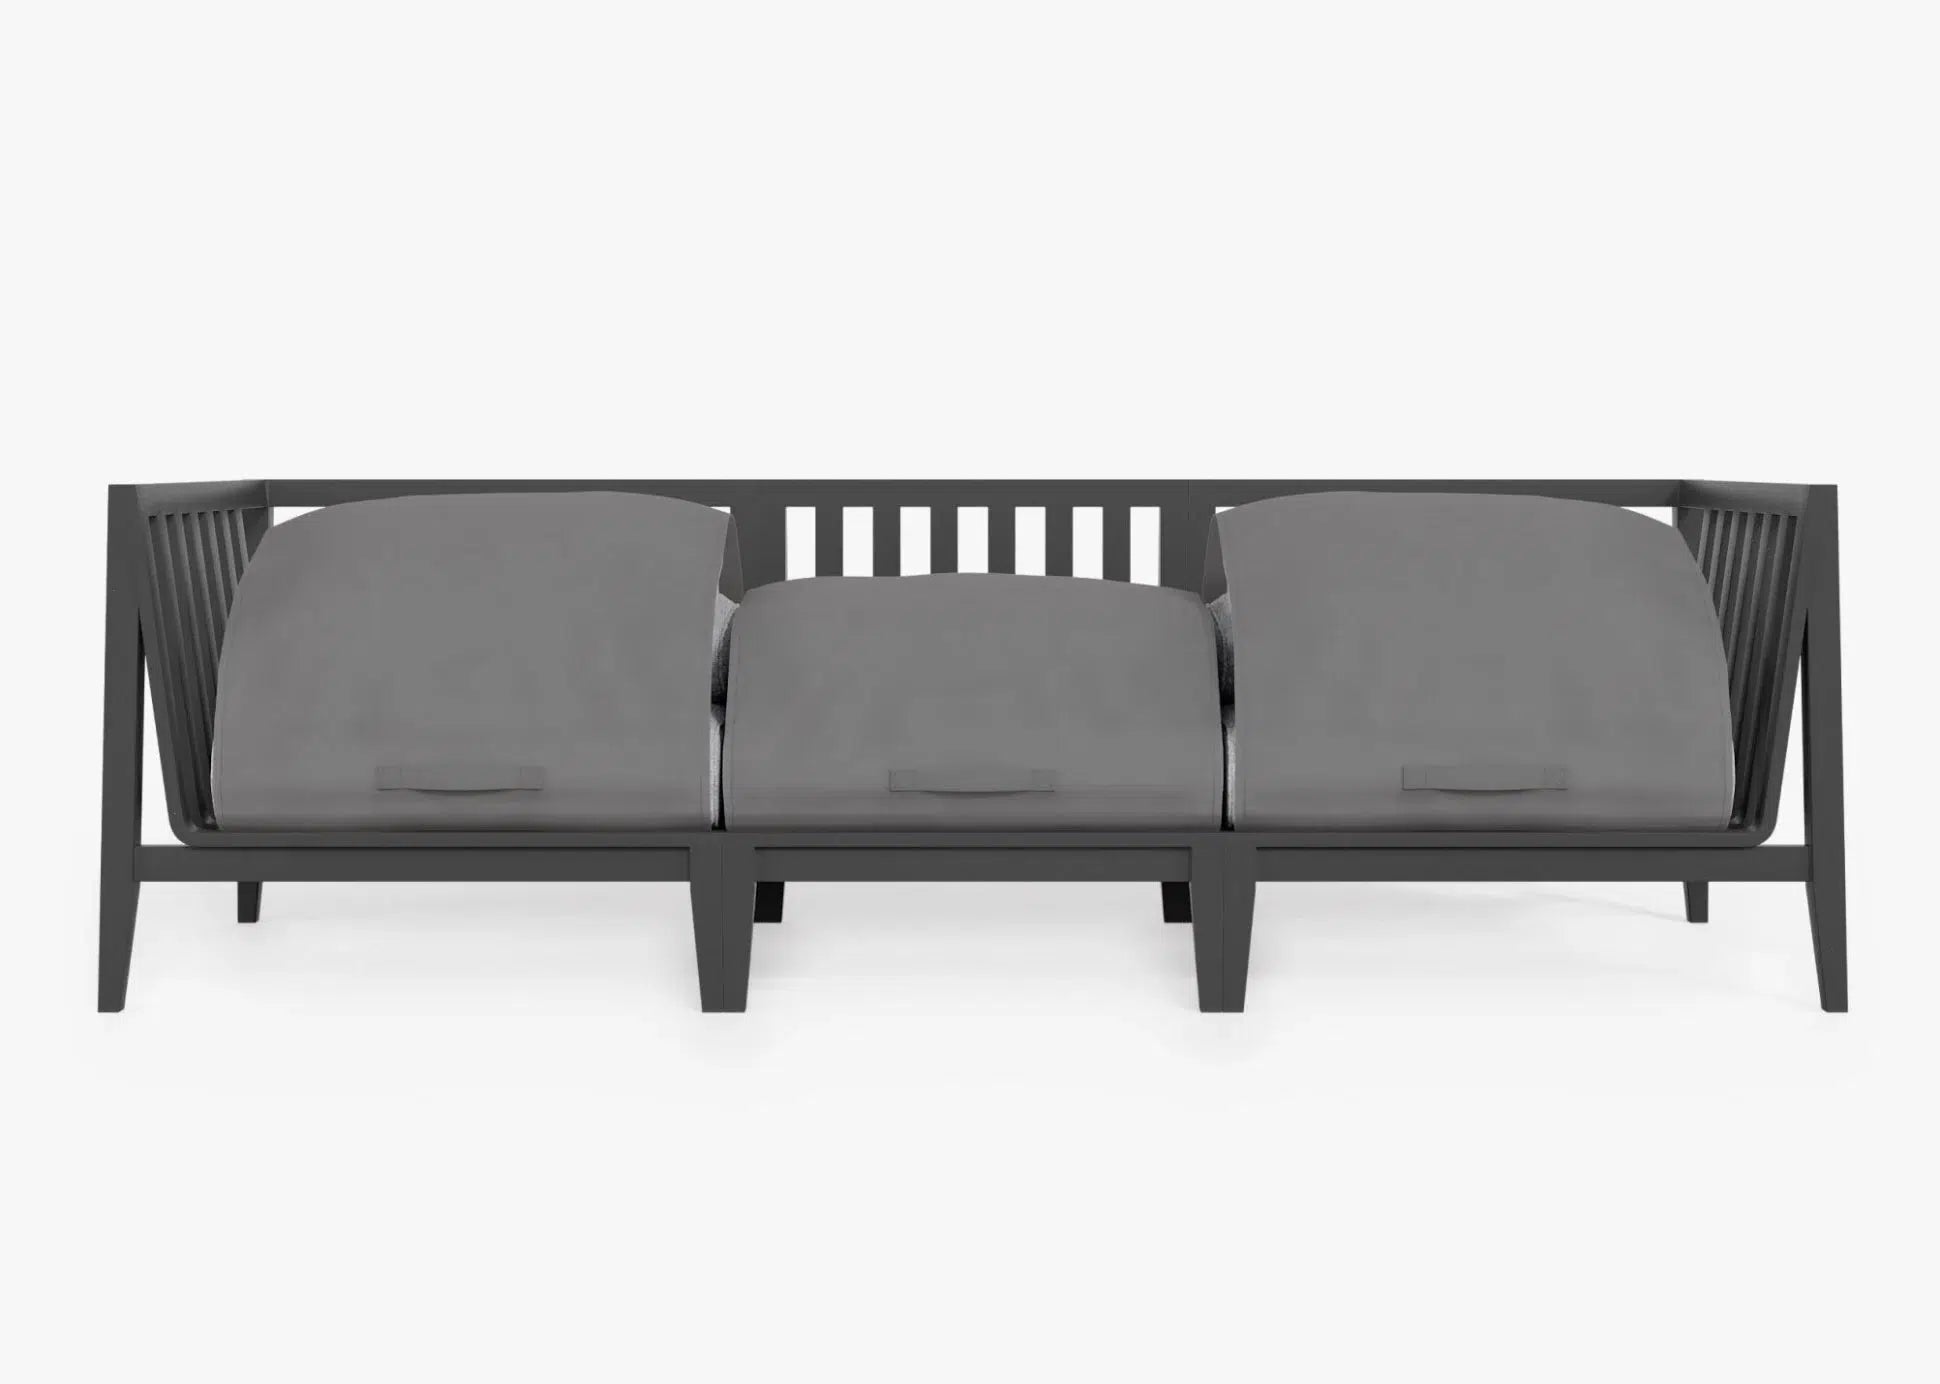 Live Outer 98" Charcoal Aluminum Outdoor 3-Seat Sofa With Pacific Fog Gray Cushion